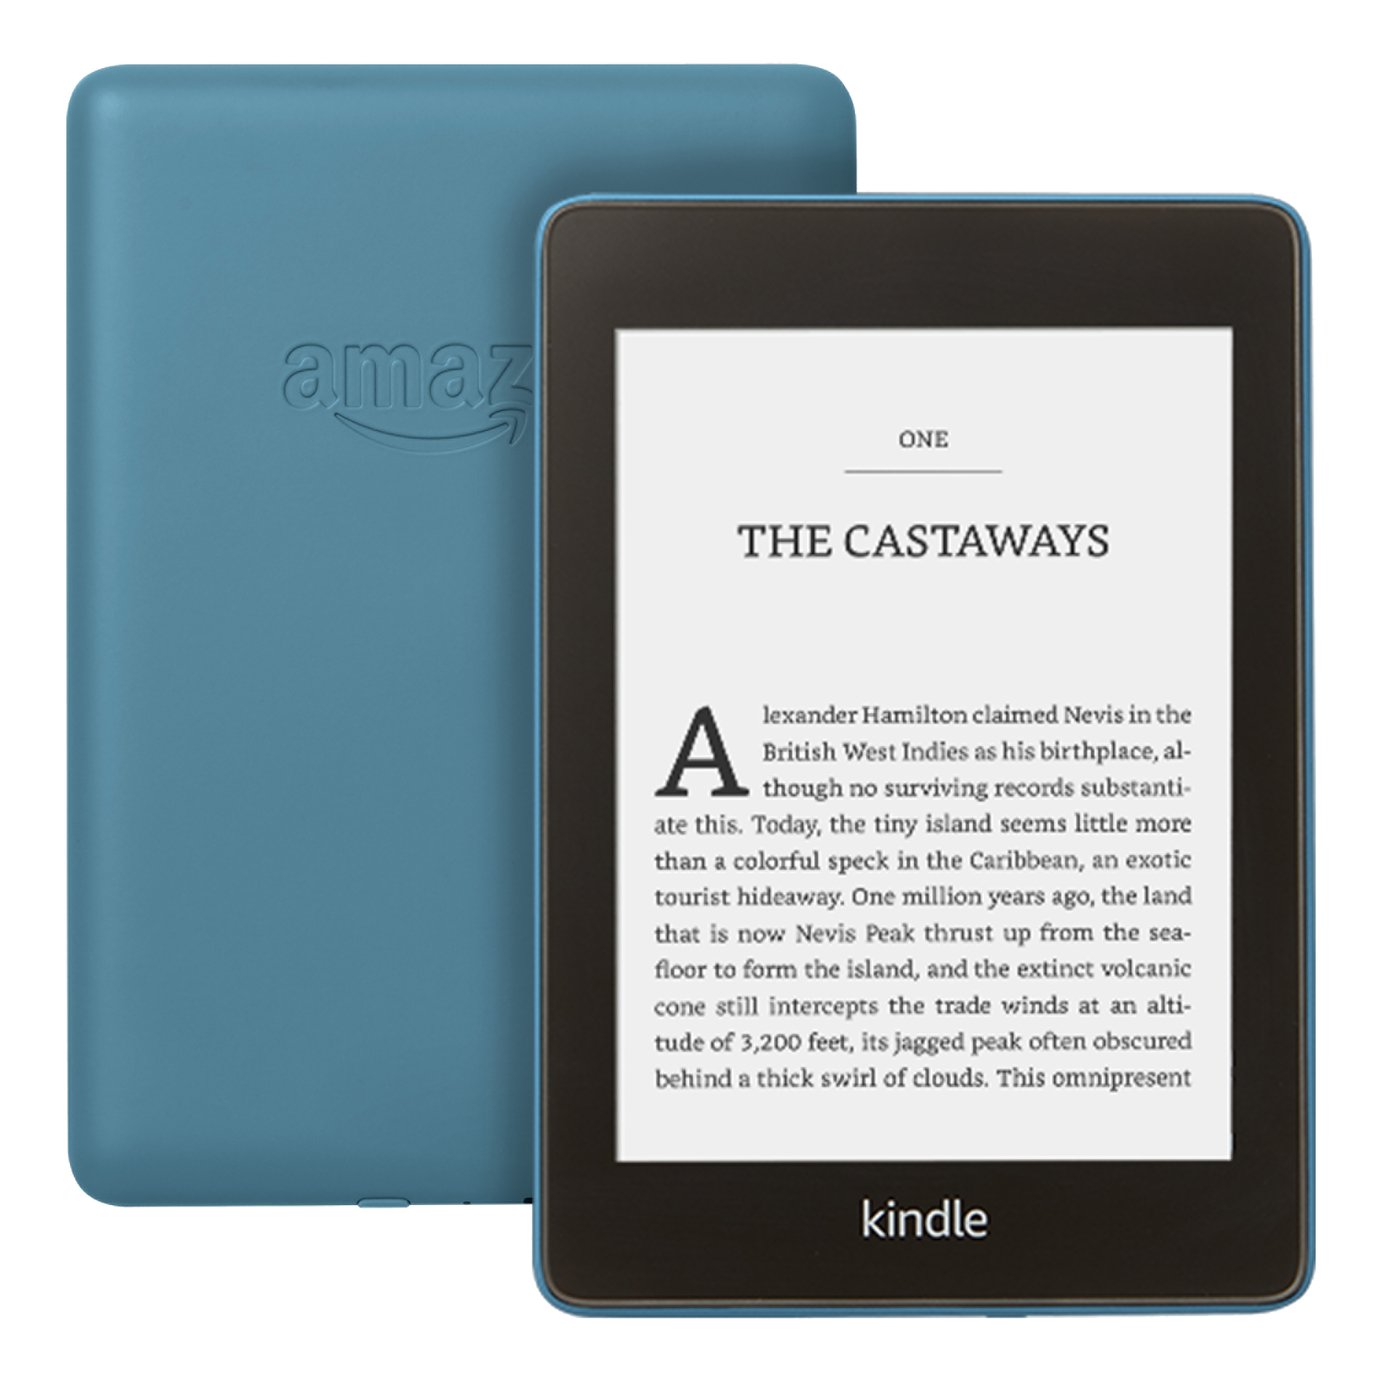 Kindle Paperwhite 32GB E-Reader Review